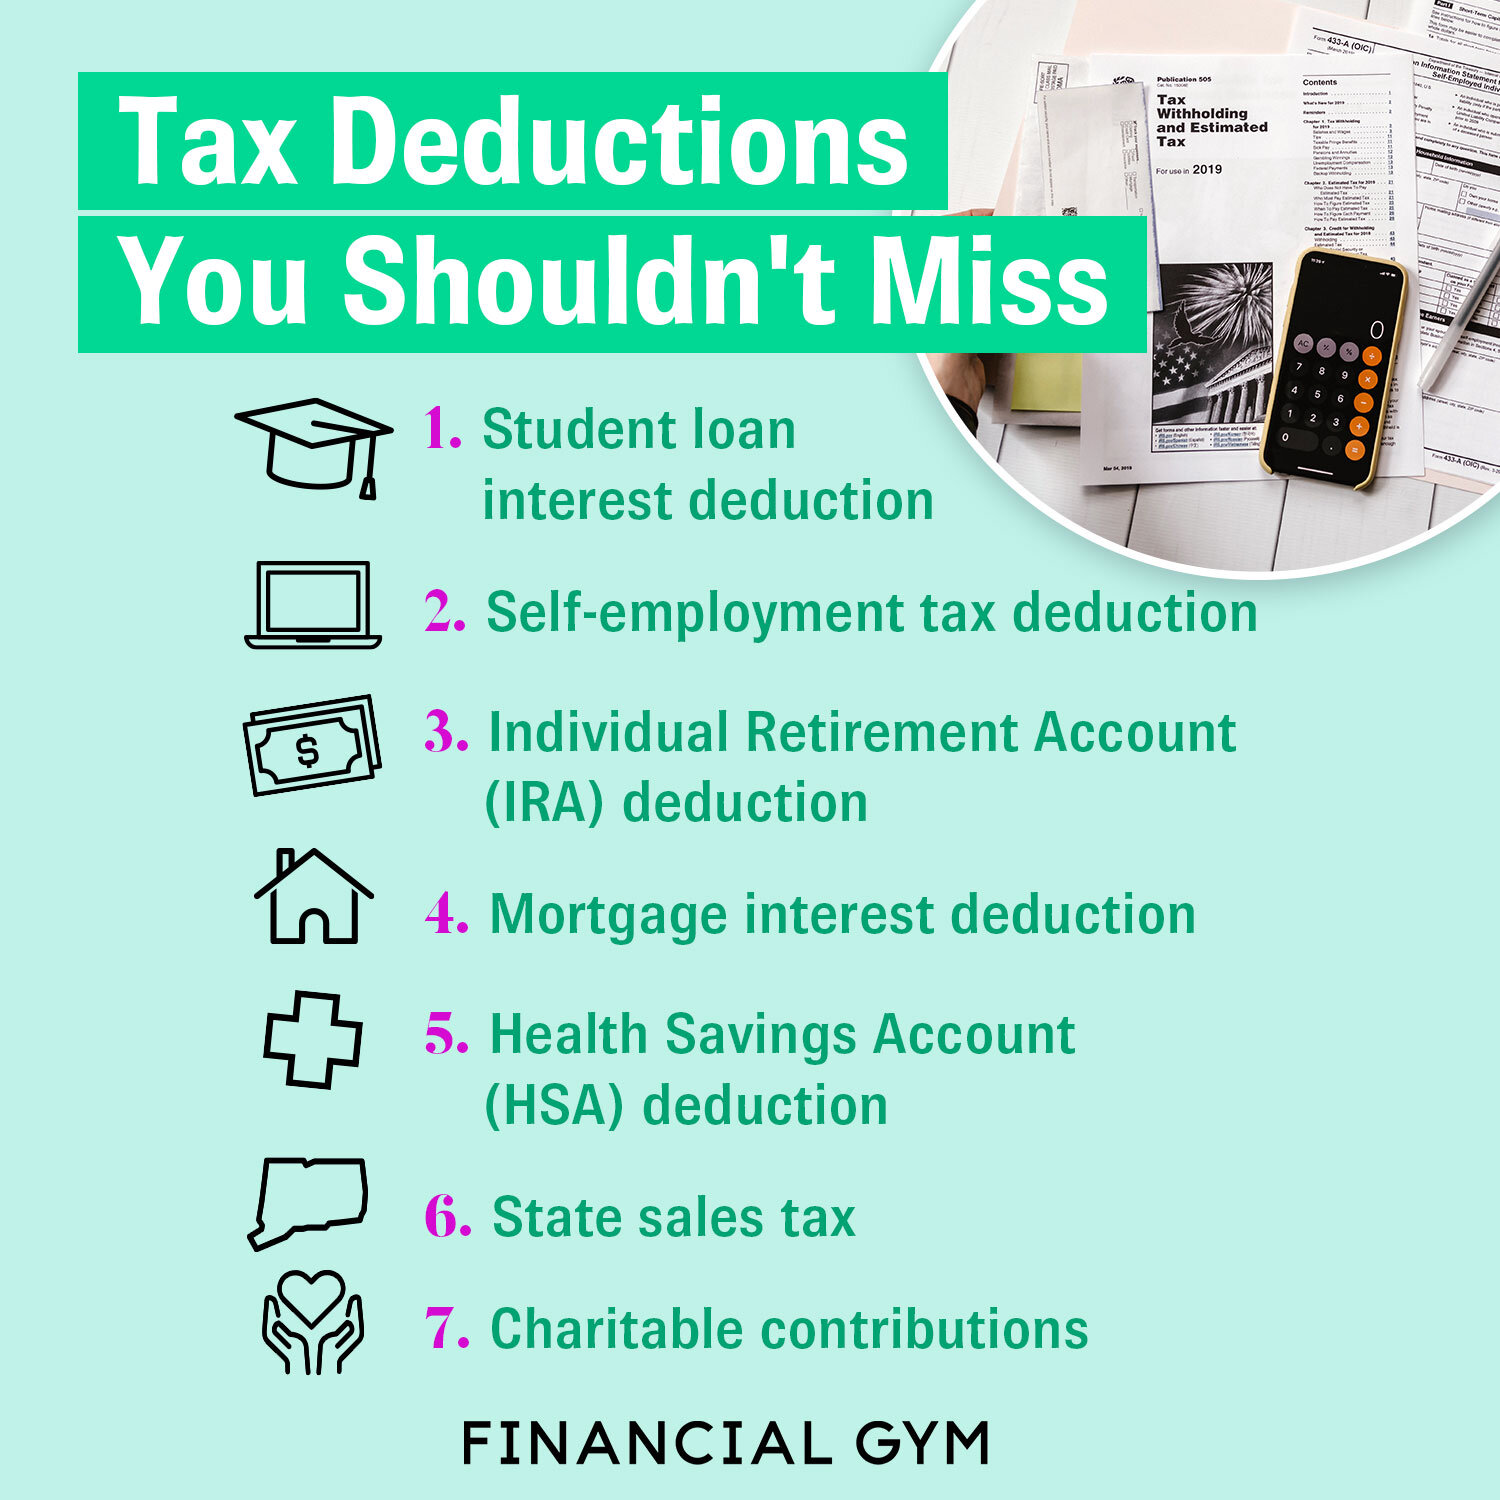 Fans deductions only tax Write offs